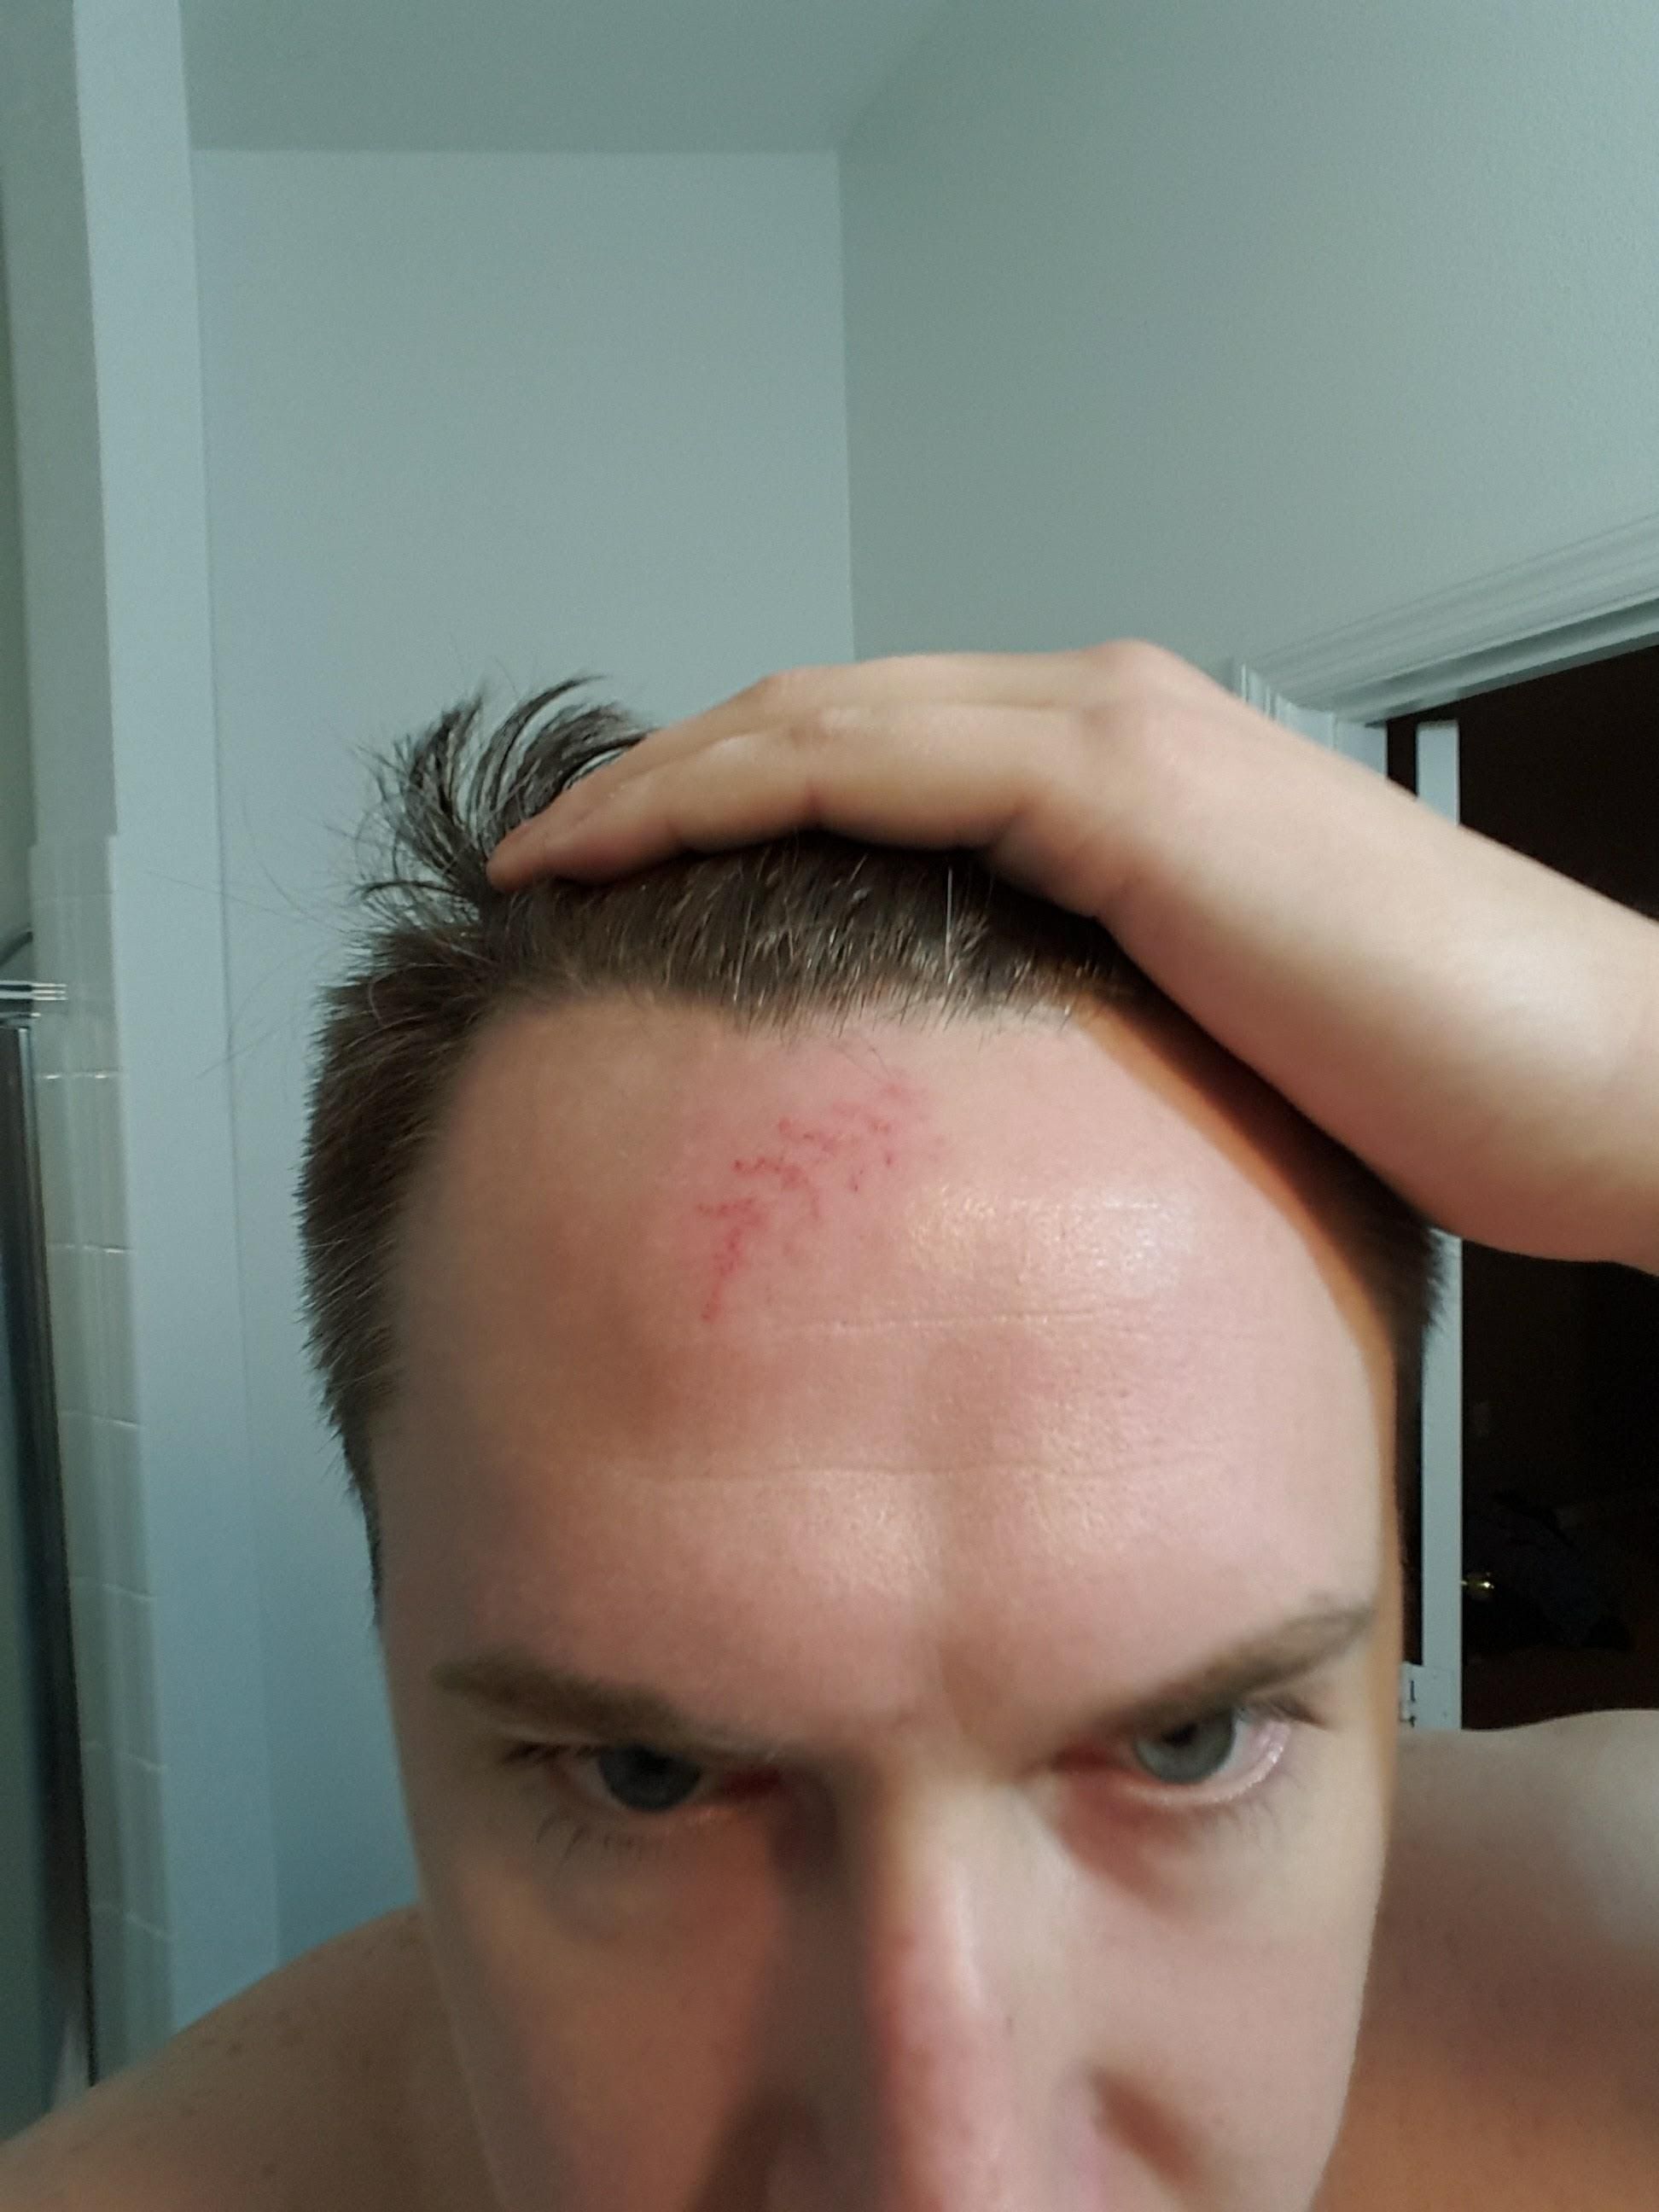 Joined a softball league, first game ever got hit in the forehead by the ball